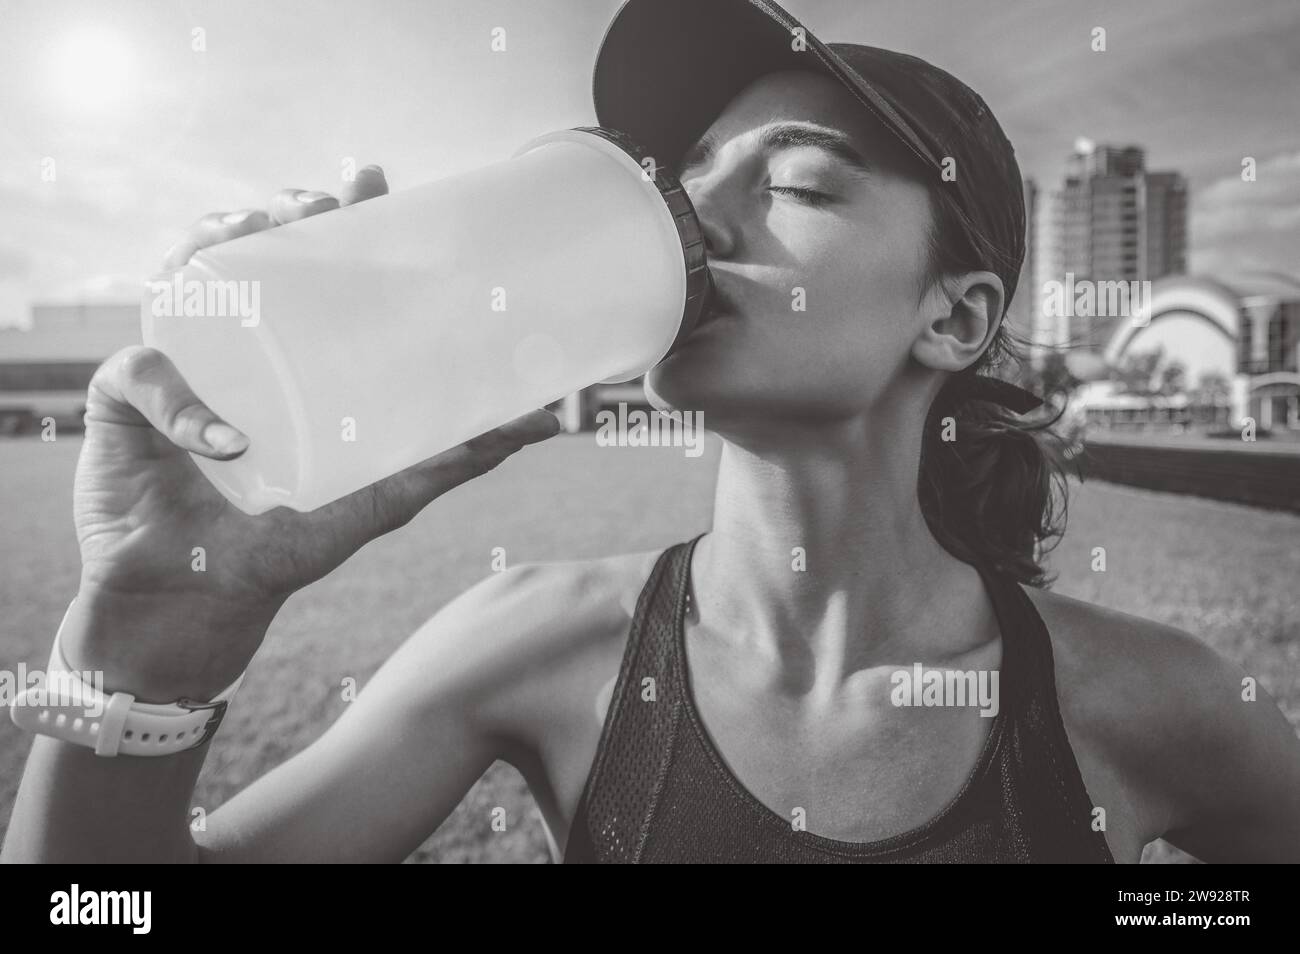 Image of a girl drinking from a bottle after a run. Running concept. Mixed media Stock Photo